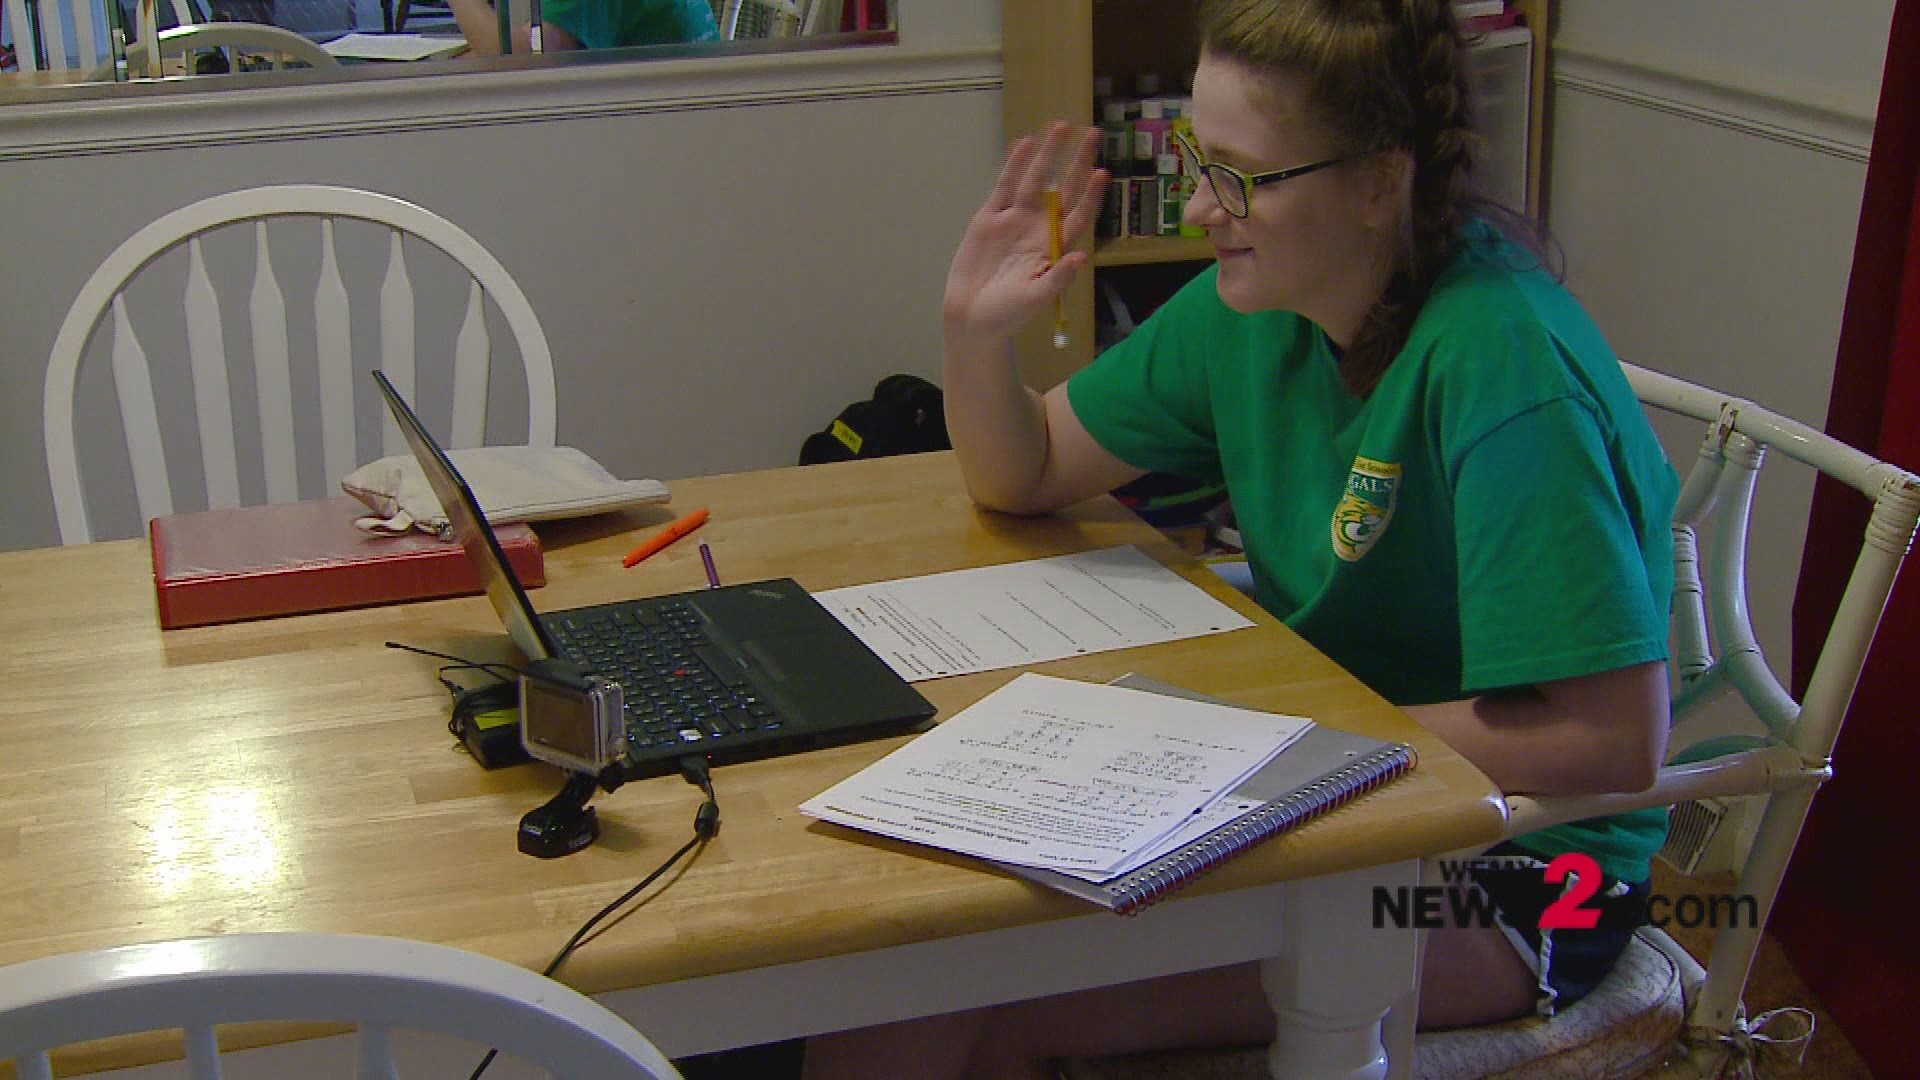 “I miss seeing my friends,” said Emily while attempting math class at home. Students are trying to stay engaged with learning while working from home.